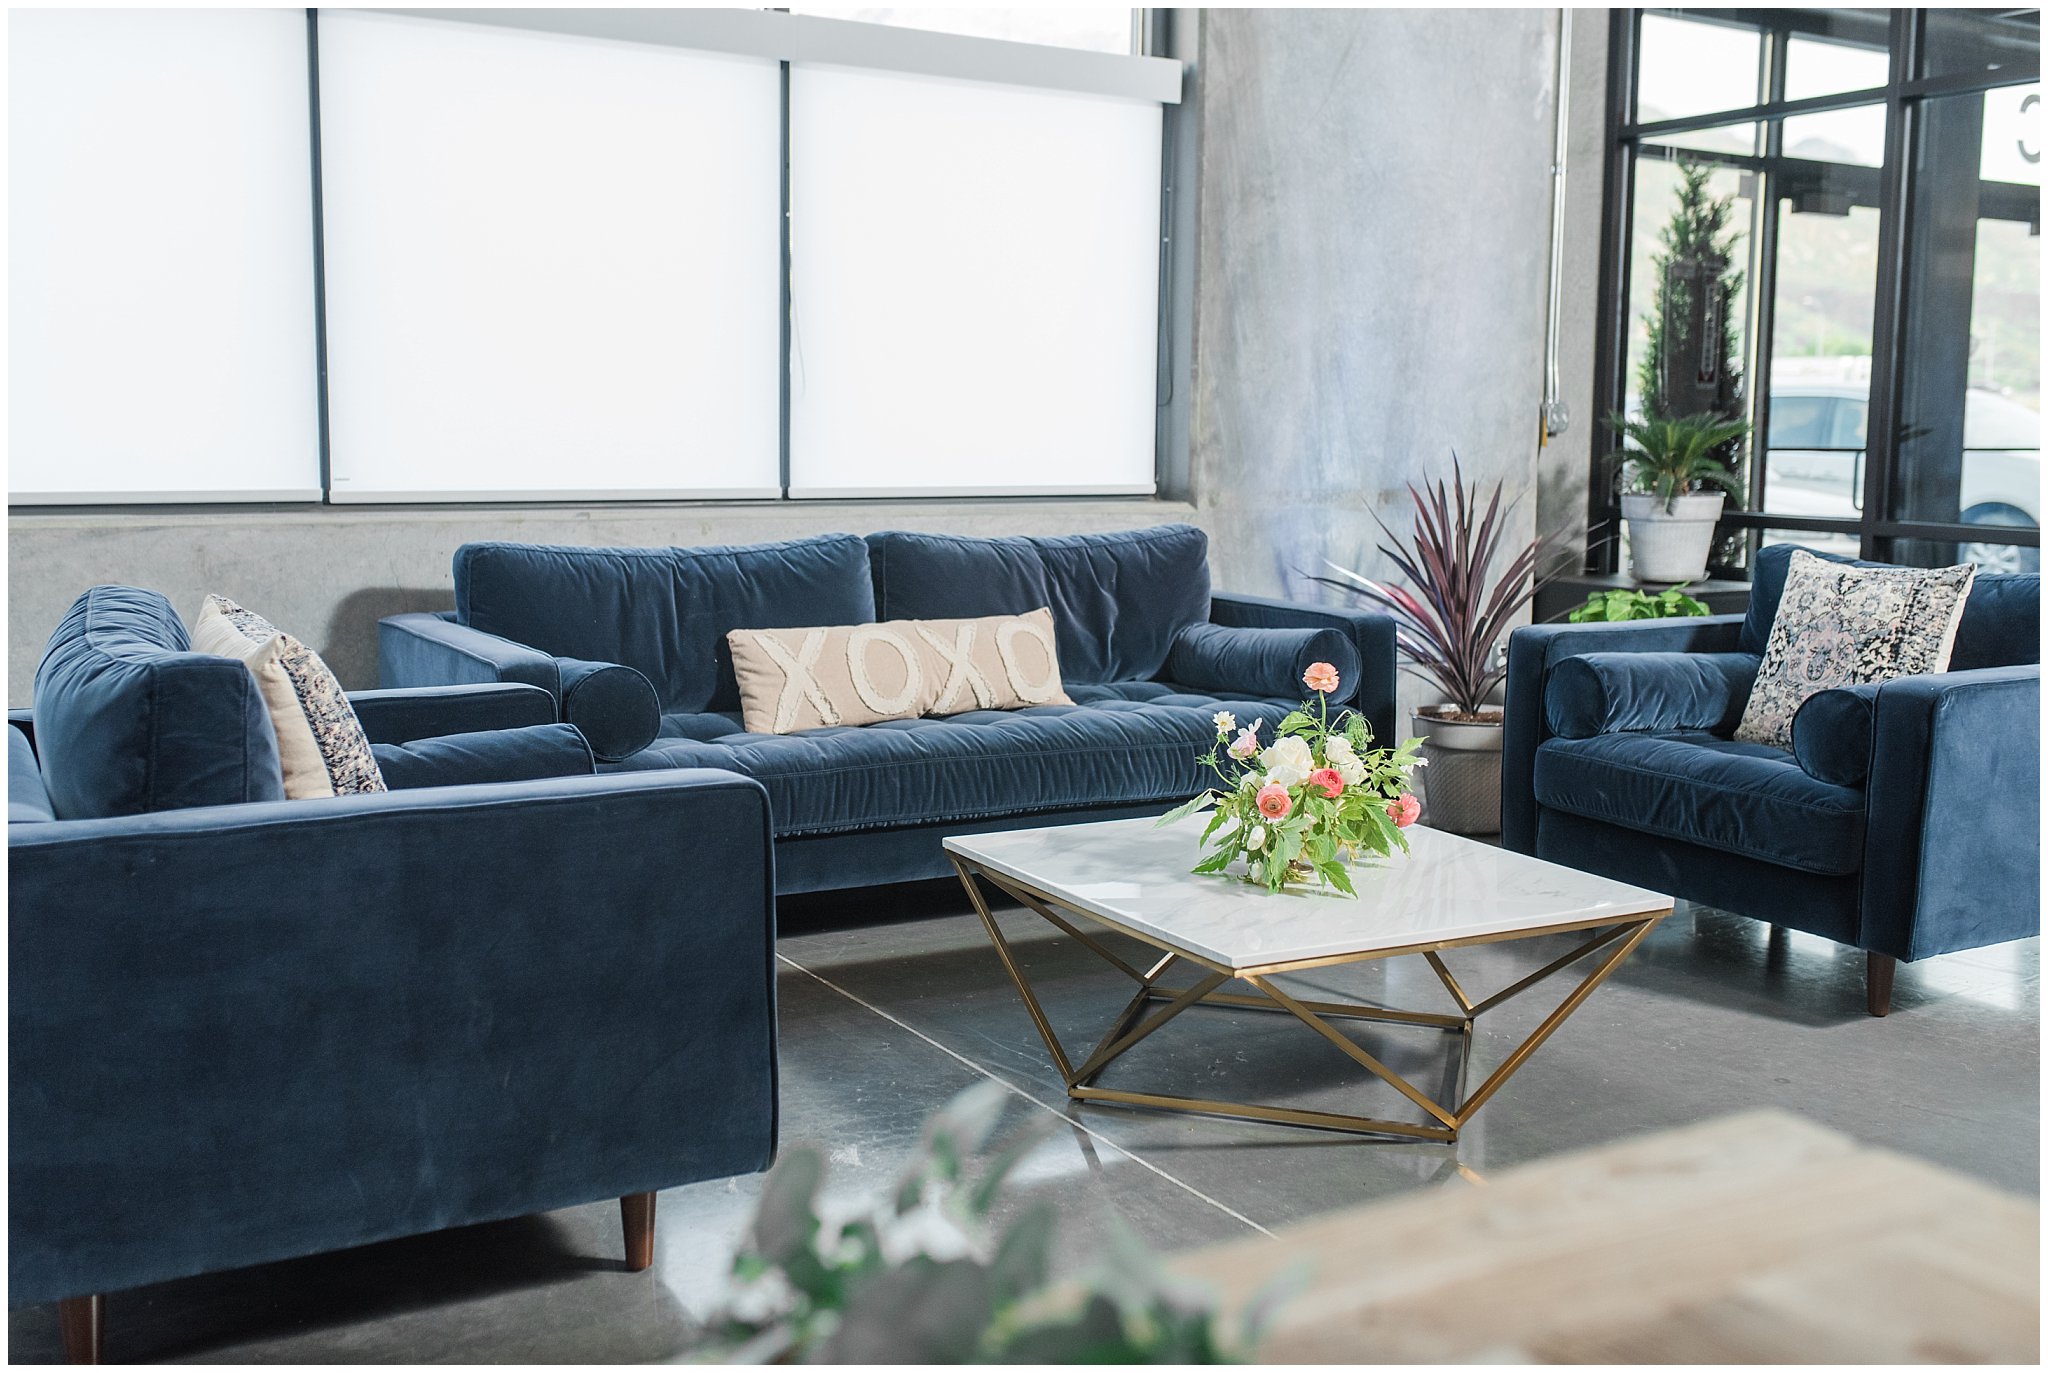 Modern style couches for guests | The Foundry | Utah Wedding Venue | Shout-out Saturday | Jessie and Dallin Photography